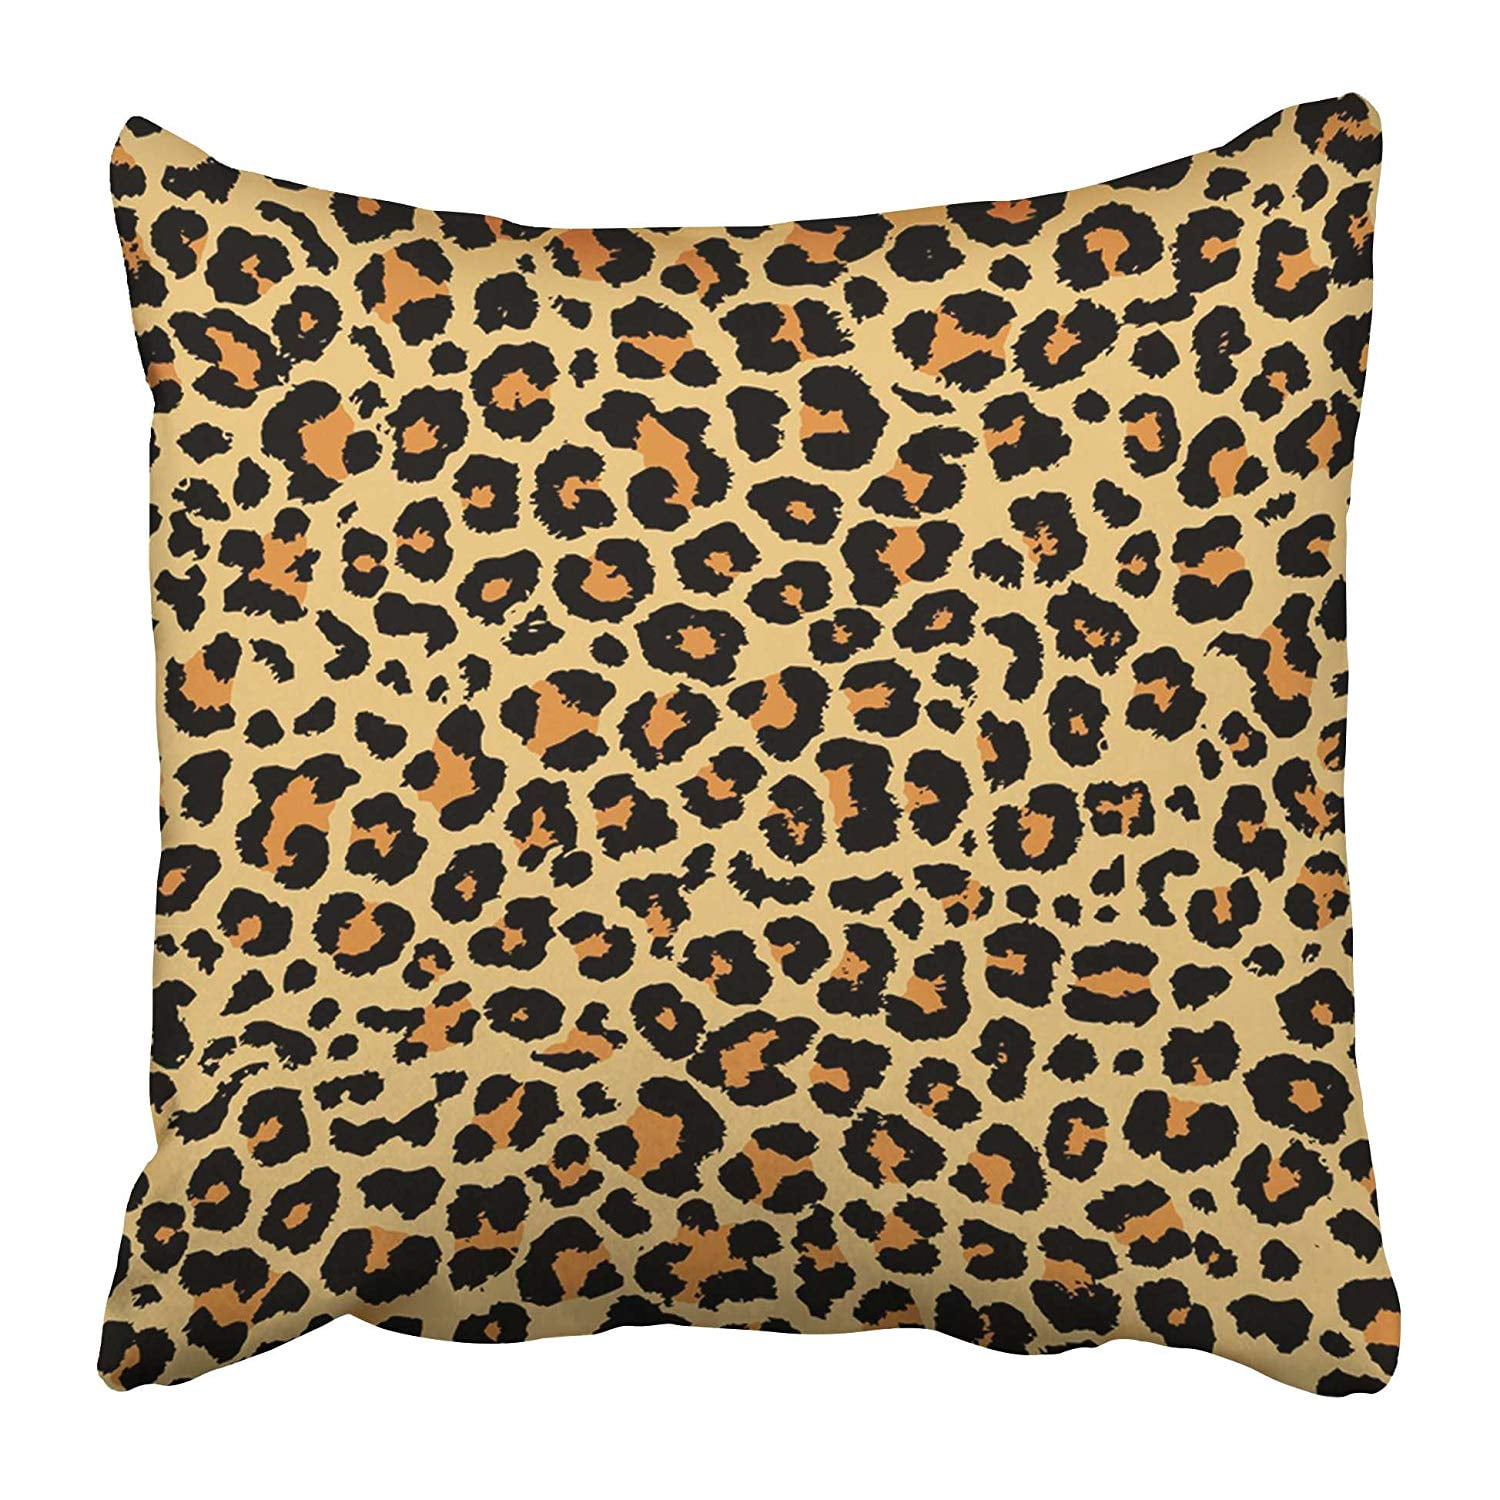 Multicolor Black and Yellow Decorations Black and Yellow Leopard Print Cheetah Animal Pattern Throw Pillow 18x18 